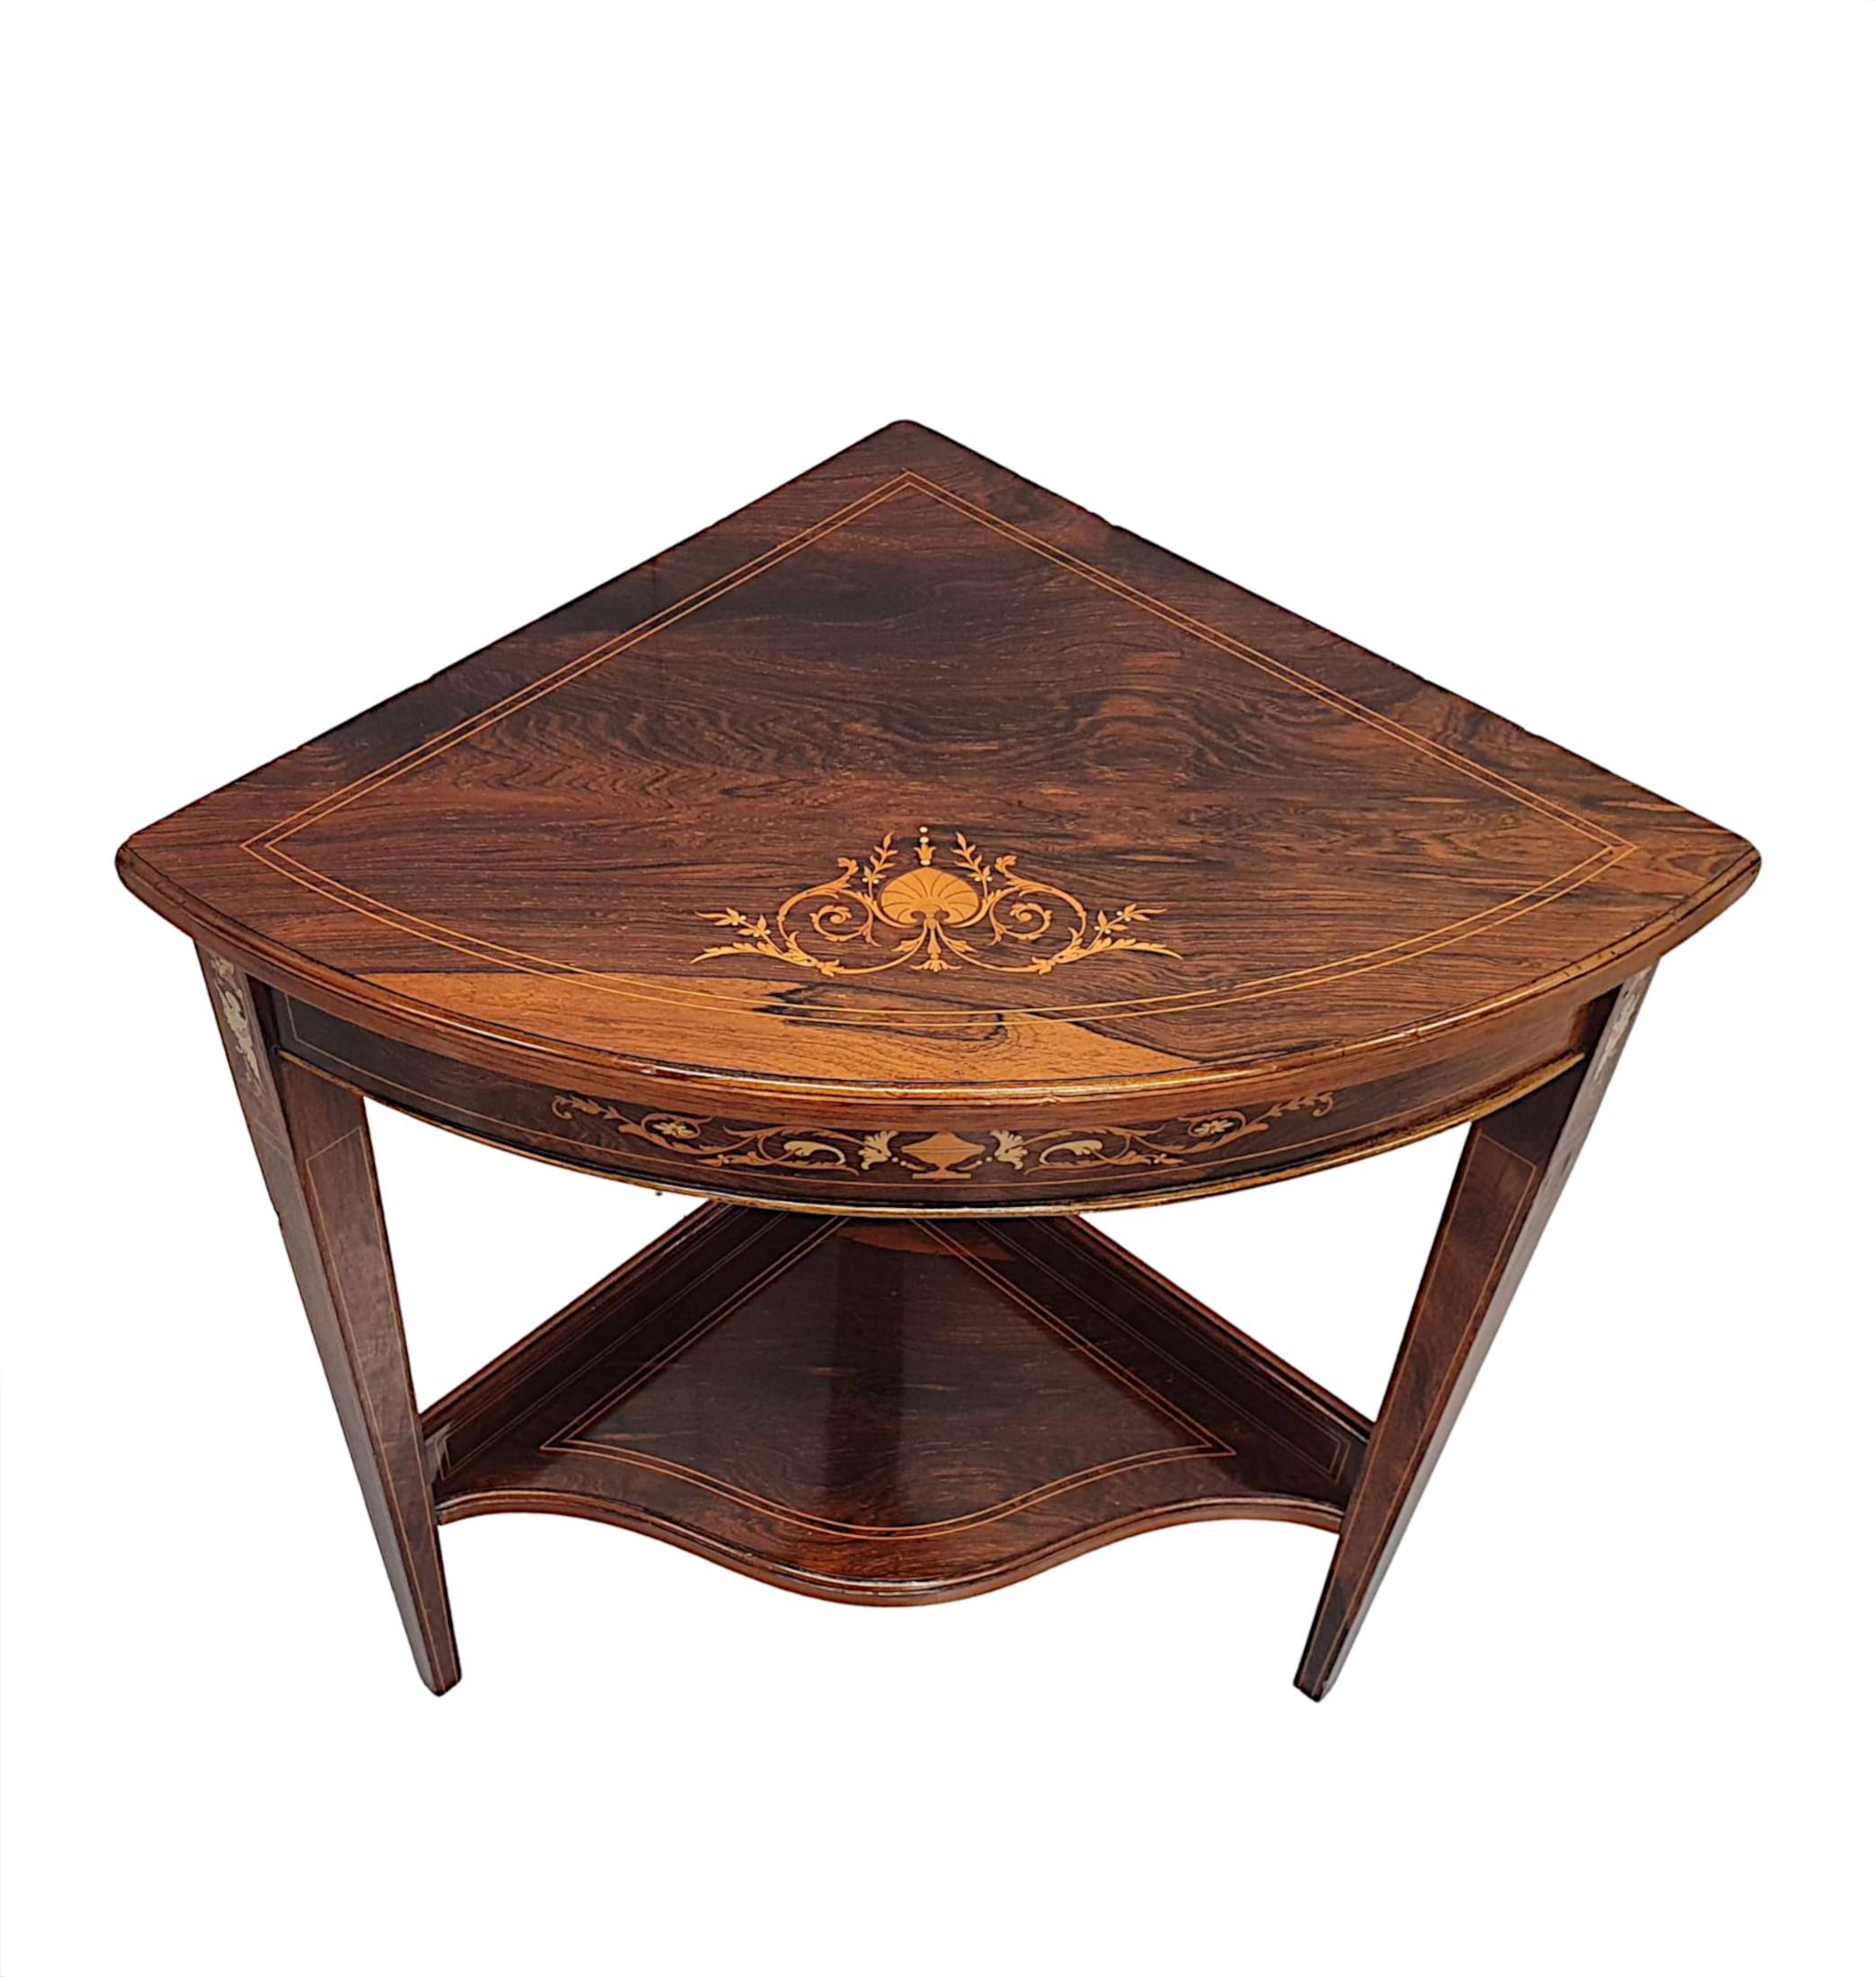 A gorgeous Edwardian fruitwood corner table, of fabulous quality, finely carved, richly patinated and line inlaid with exquisite Neoclassical marquetry motif detail throughout. The moulded bowfronted line inlaid top with beautifully detailed